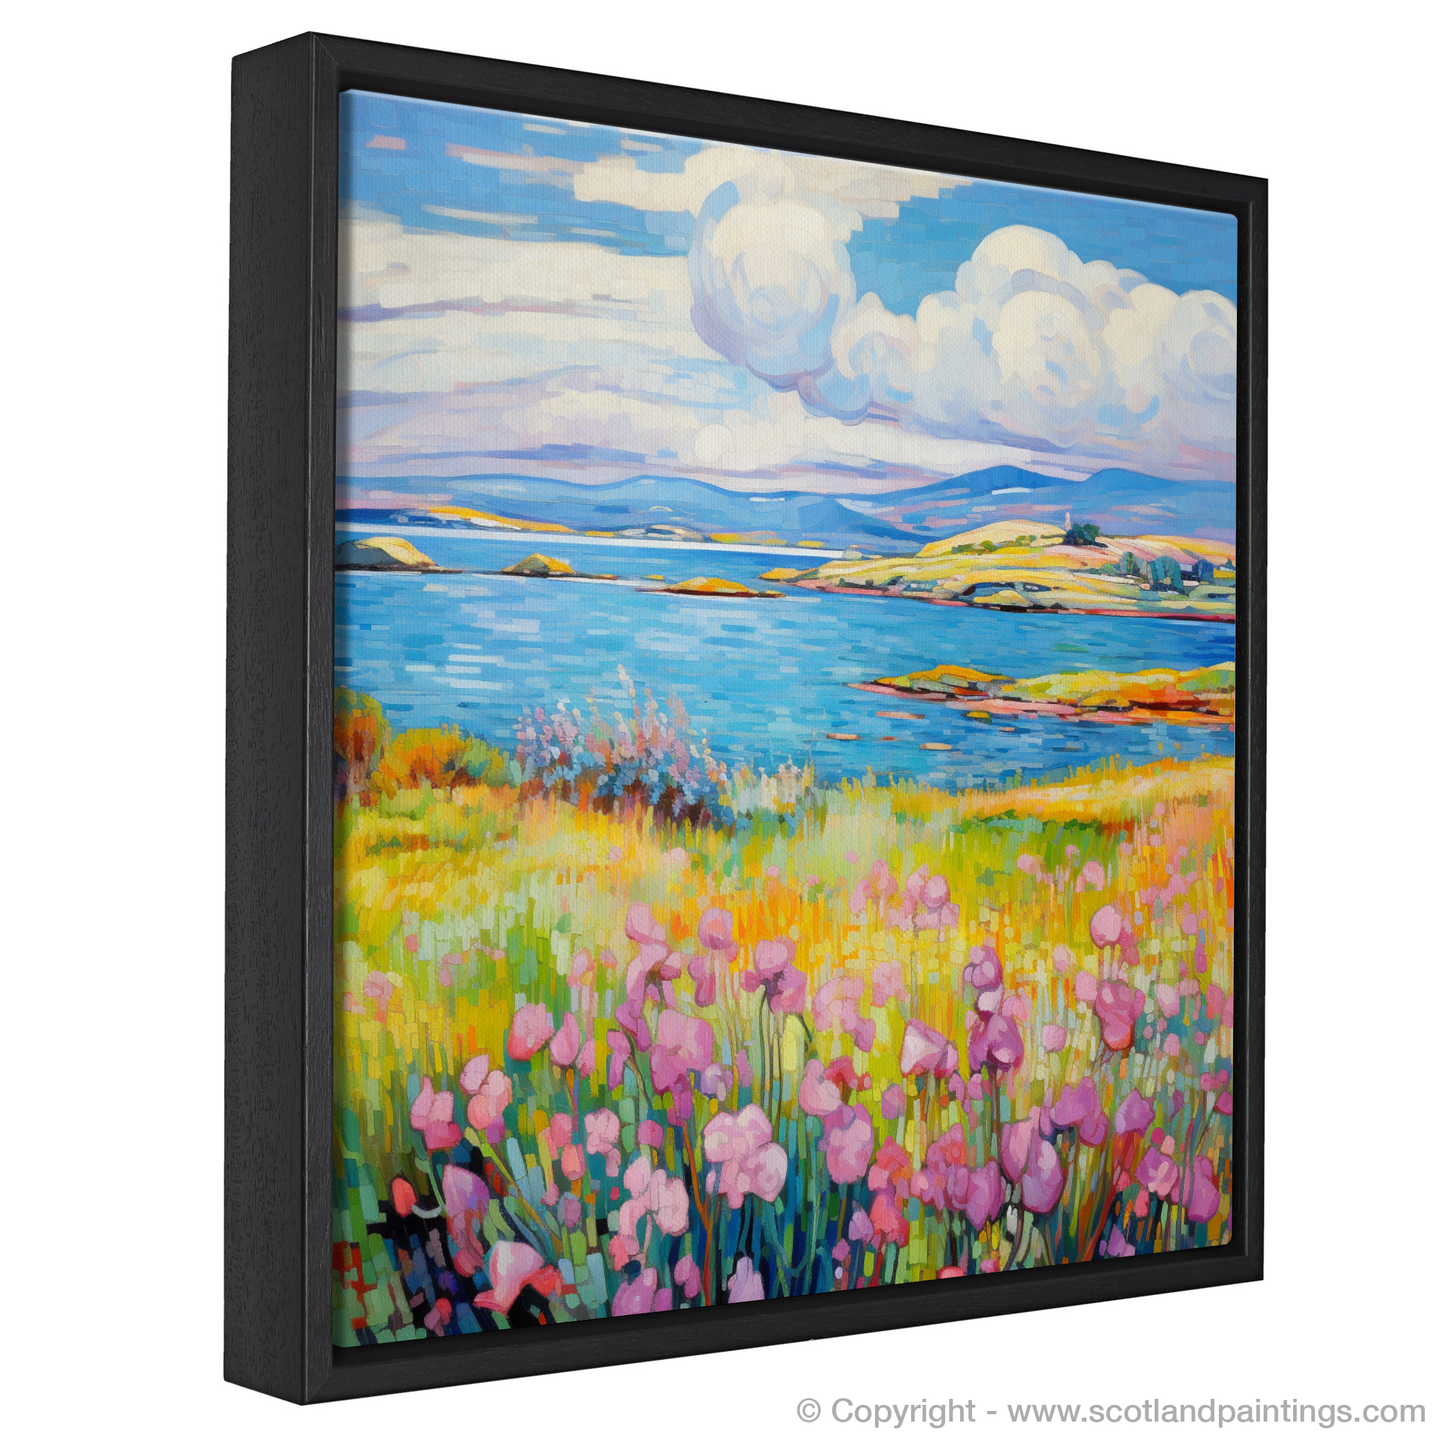 Painting and Art Print of Isle of Gigha, Inner Hebrides in summer entitled "Summer Serenade on the Isle of Gigha".